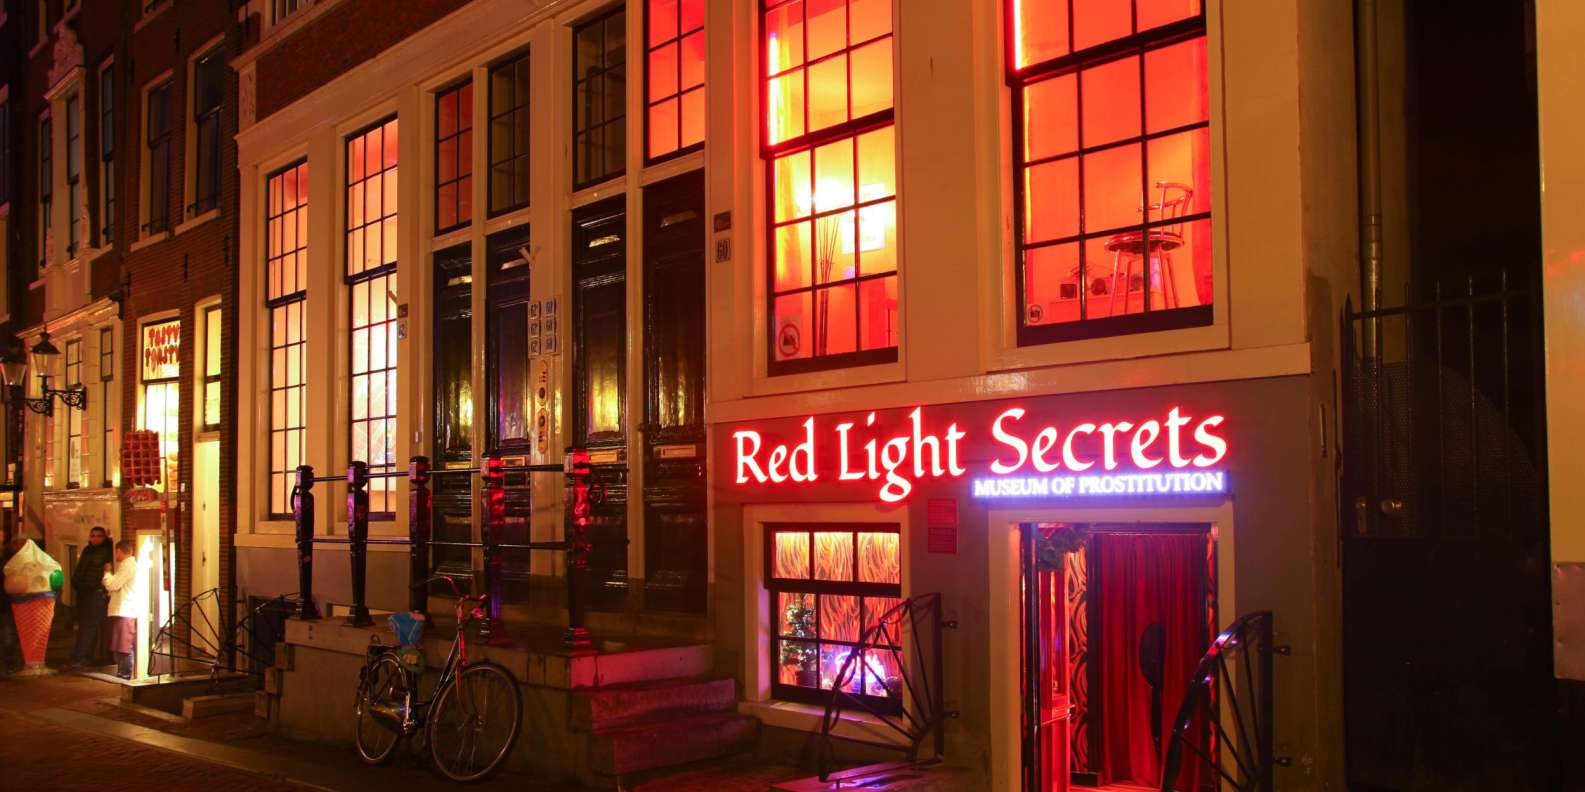 Red Light Secrets Museum of Prostitution | GetYourGuide